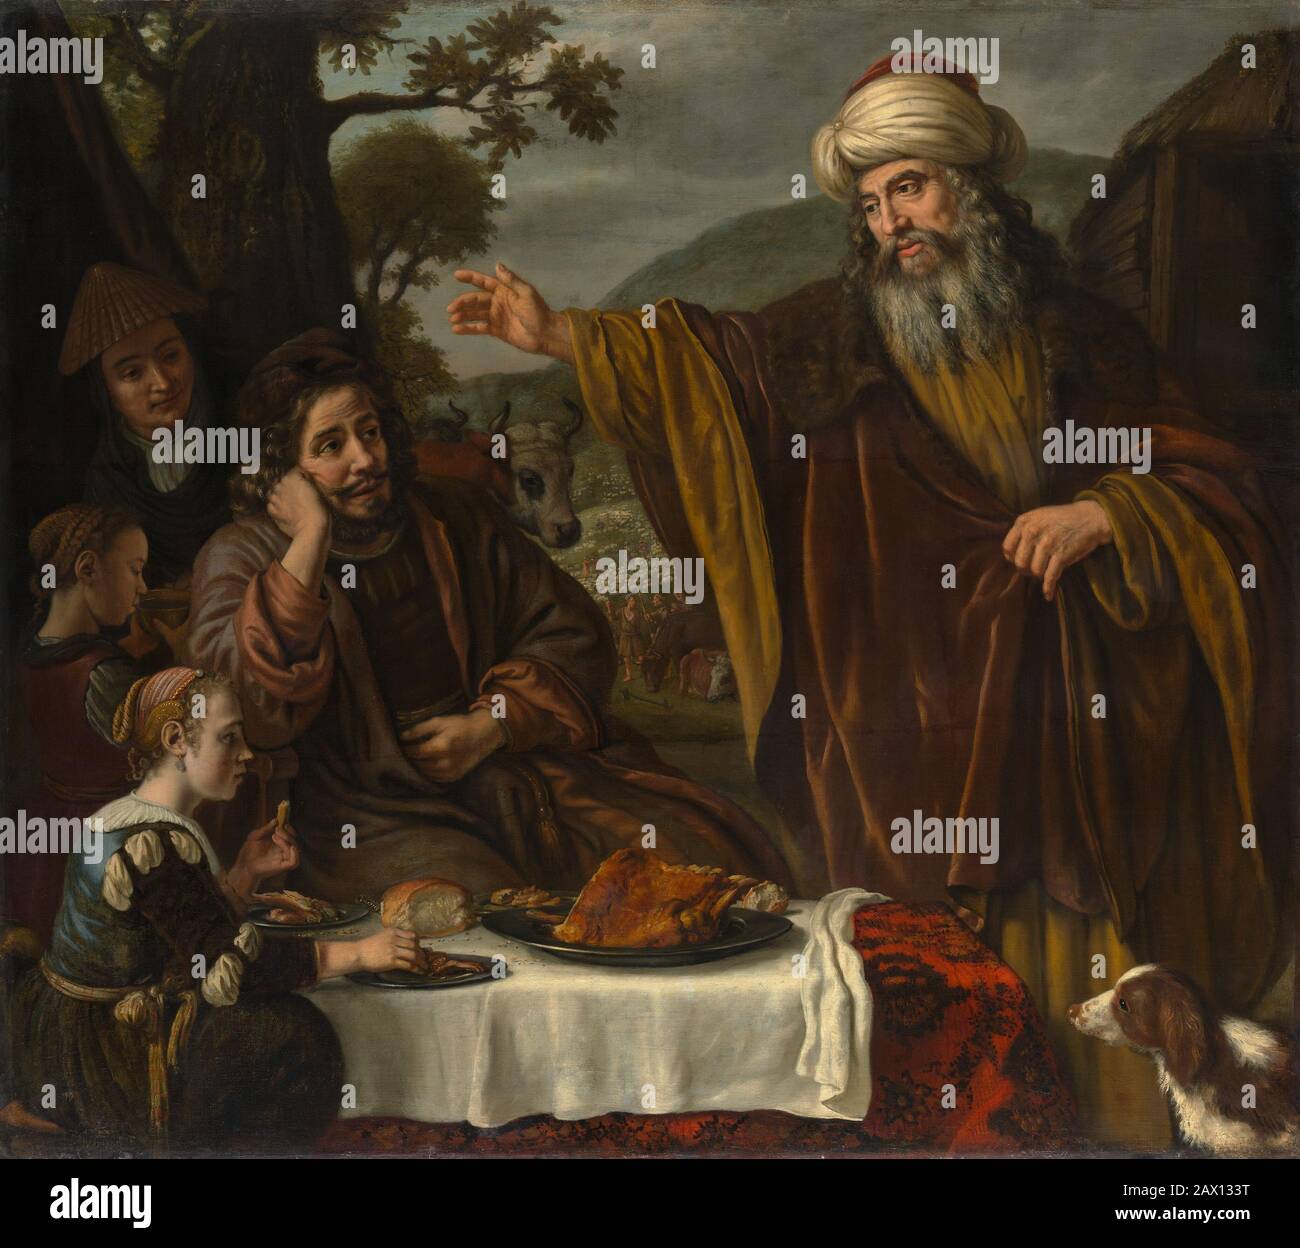 Abraham's Parting from the Family of Lot, ca. 1655-65. Stock Photo